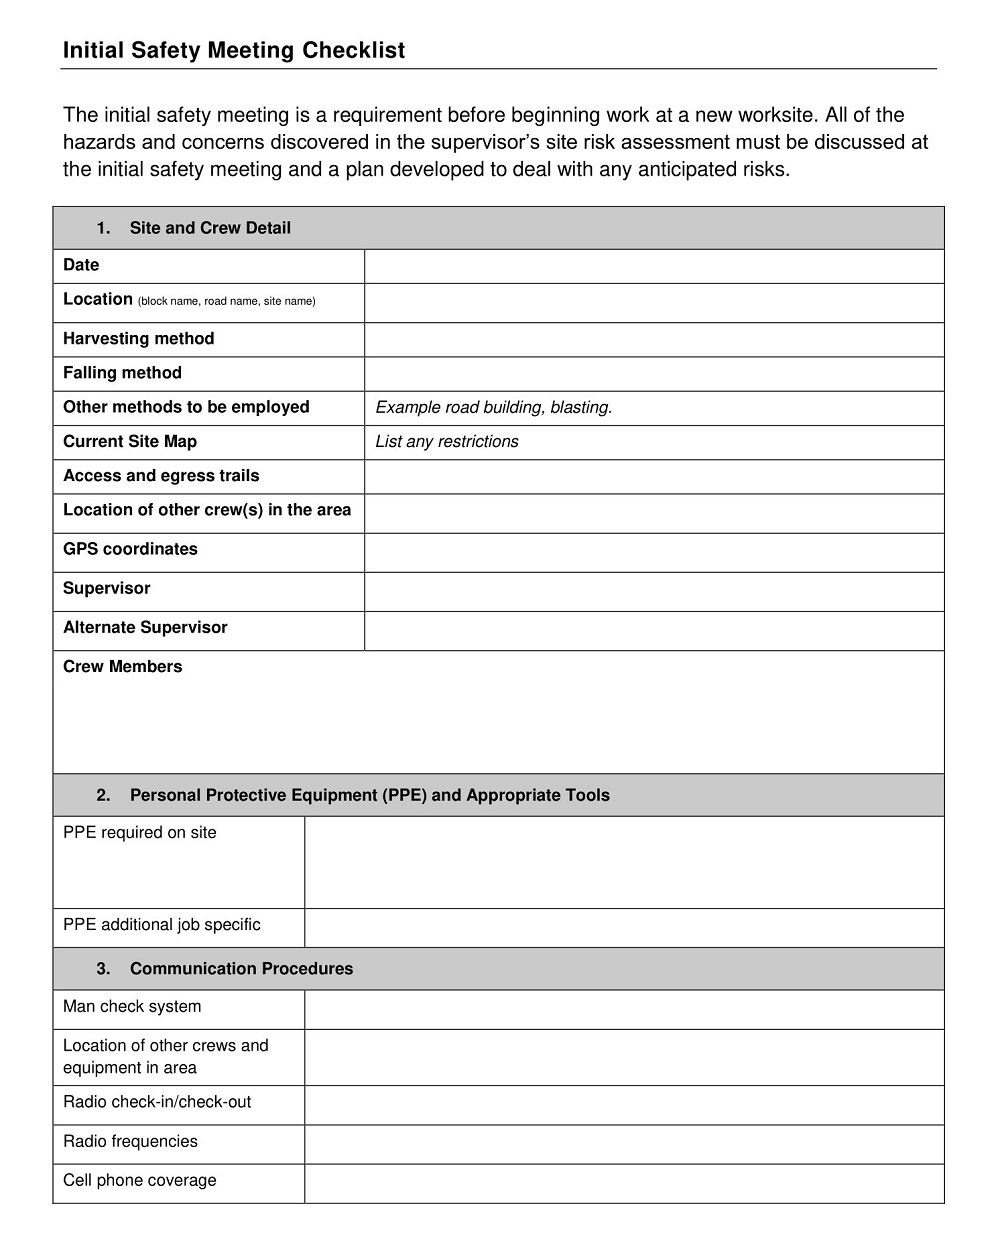 Initial Safety Meeting Checklist Template